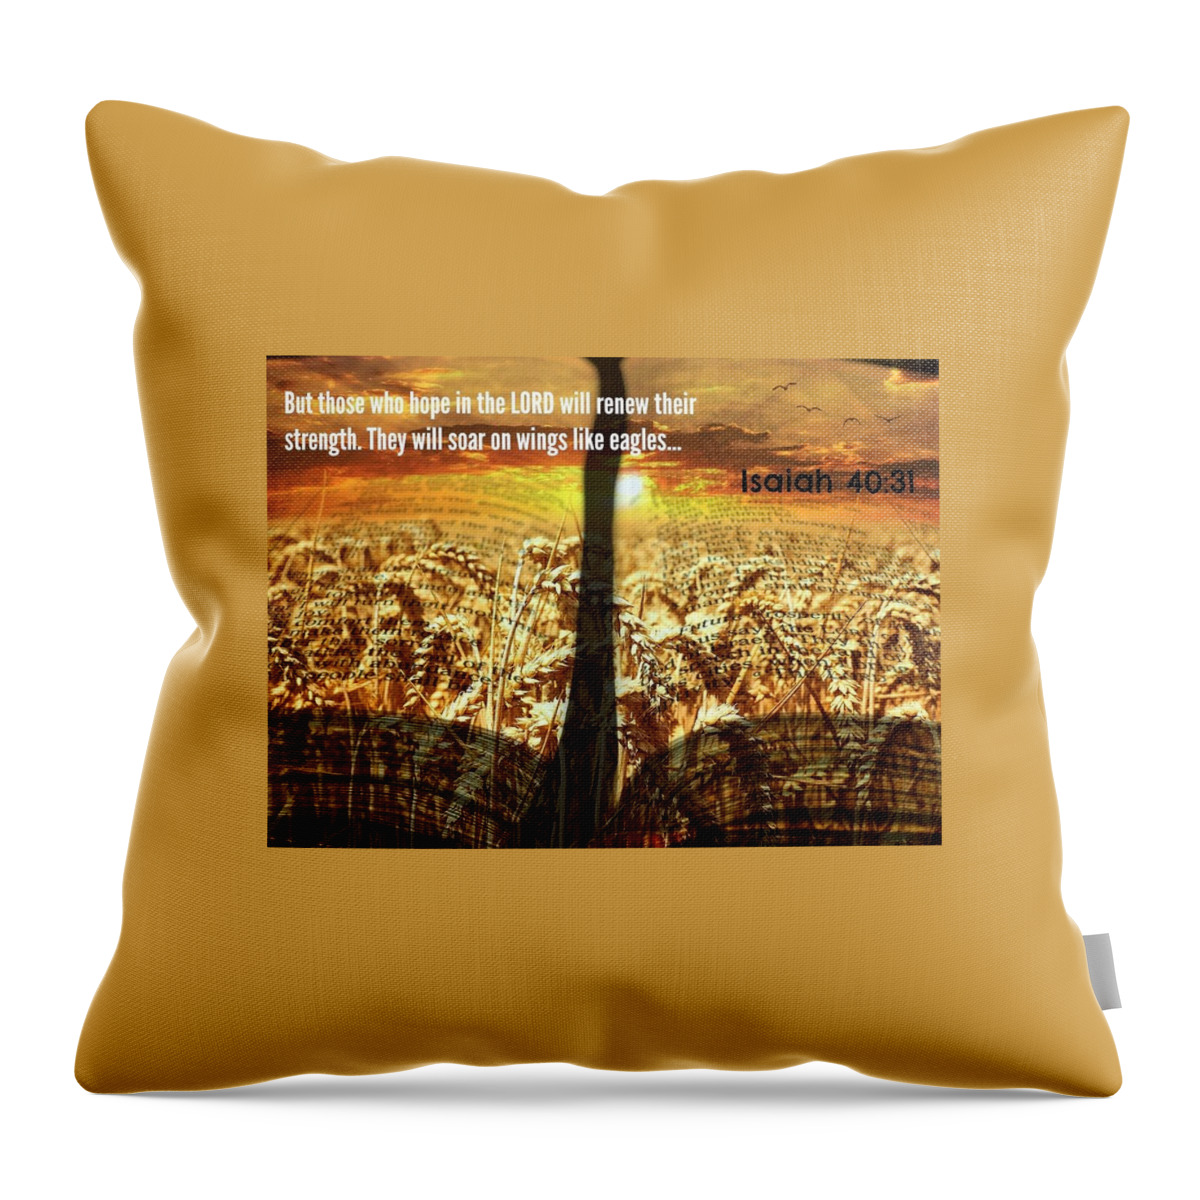  Throw Pillow featuring the photograph Popular202 by David Norman